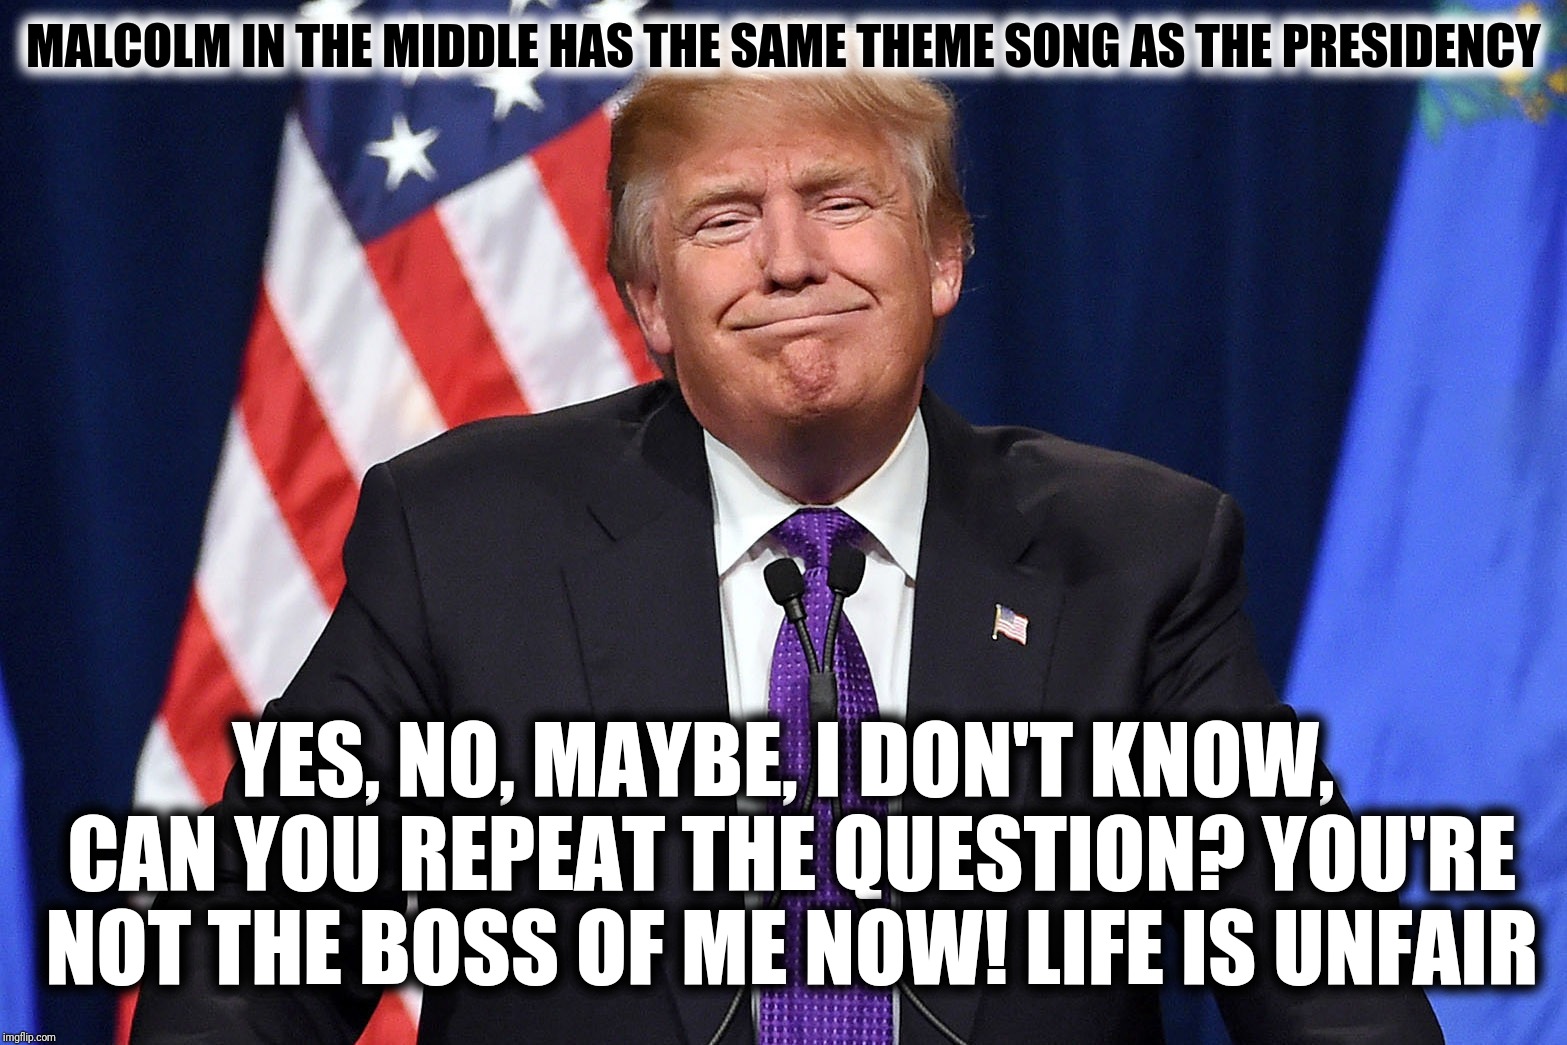 Malcolm In The Middle has the same theme song as The Presidency  | MALCOLM IN THE MIDDLE HAS THE SAME THEME SONG AS THE PRESIDENCY; YES, NO, MAYBE, I DON'T KNOW, CAN YOU REPEAT THE QUESTION?
YOU'RE NOT THE BOSS OF ME NOW! LIFE IS UNFAIR | image tagged in president trump,malcolm in the middle,life is unfair,can you repeat the question,yes no maybe i don't know,theme song | made w/ Imgflip meme maker